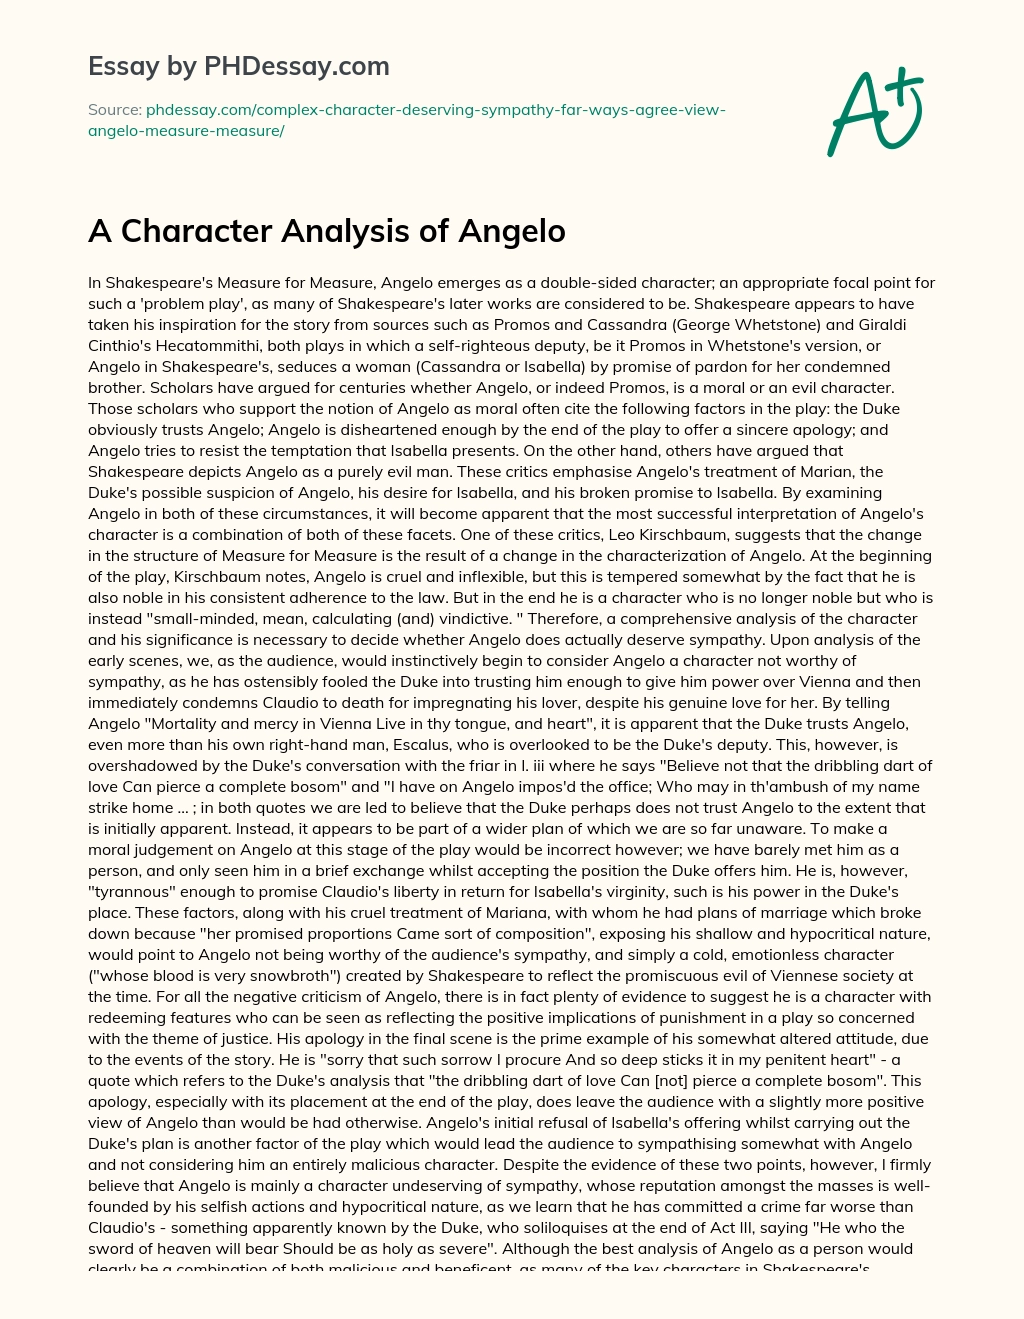 A Character Analysis of Angelo essay